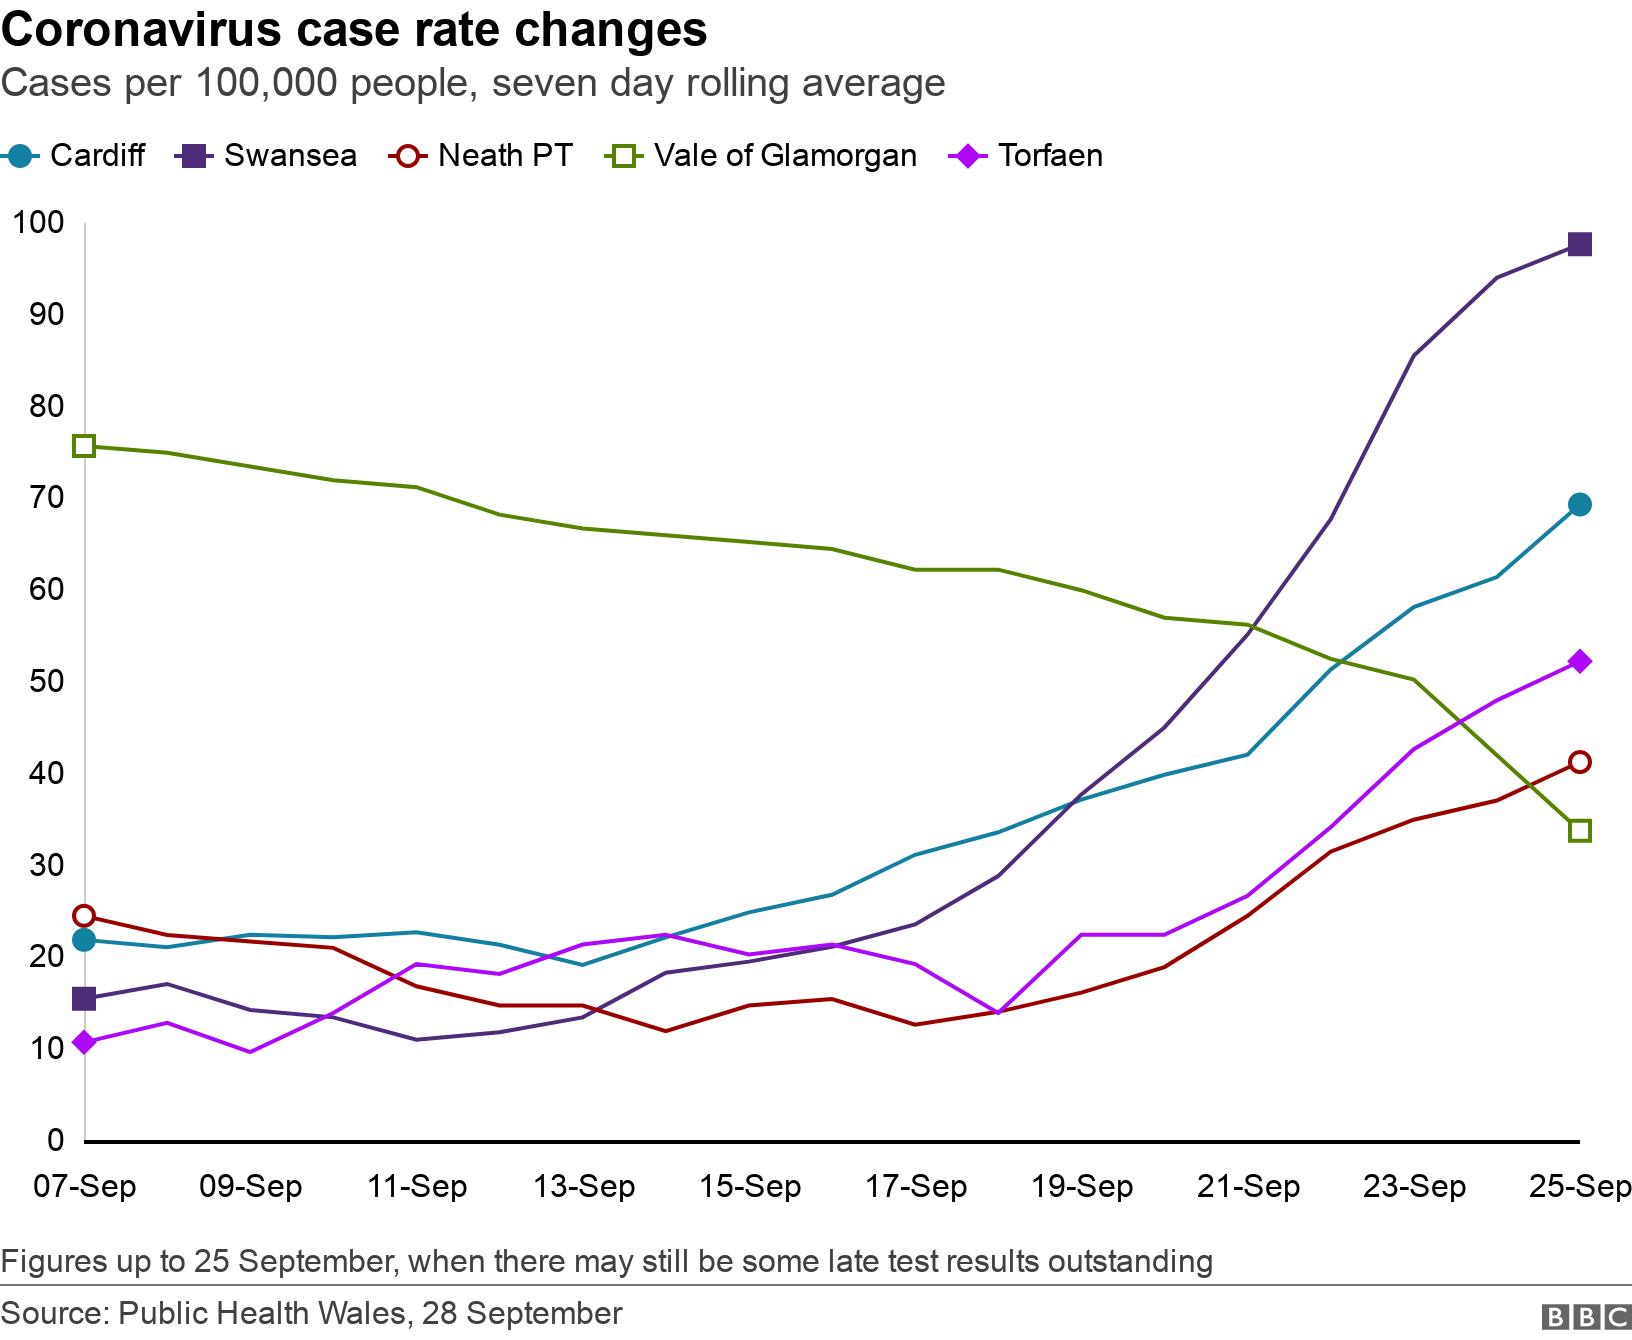 Coronavirus case rate changes. Cases per 100,000 people, seven day rolling average. Figures up to 25 September, when there may still be some late test results outstanding.